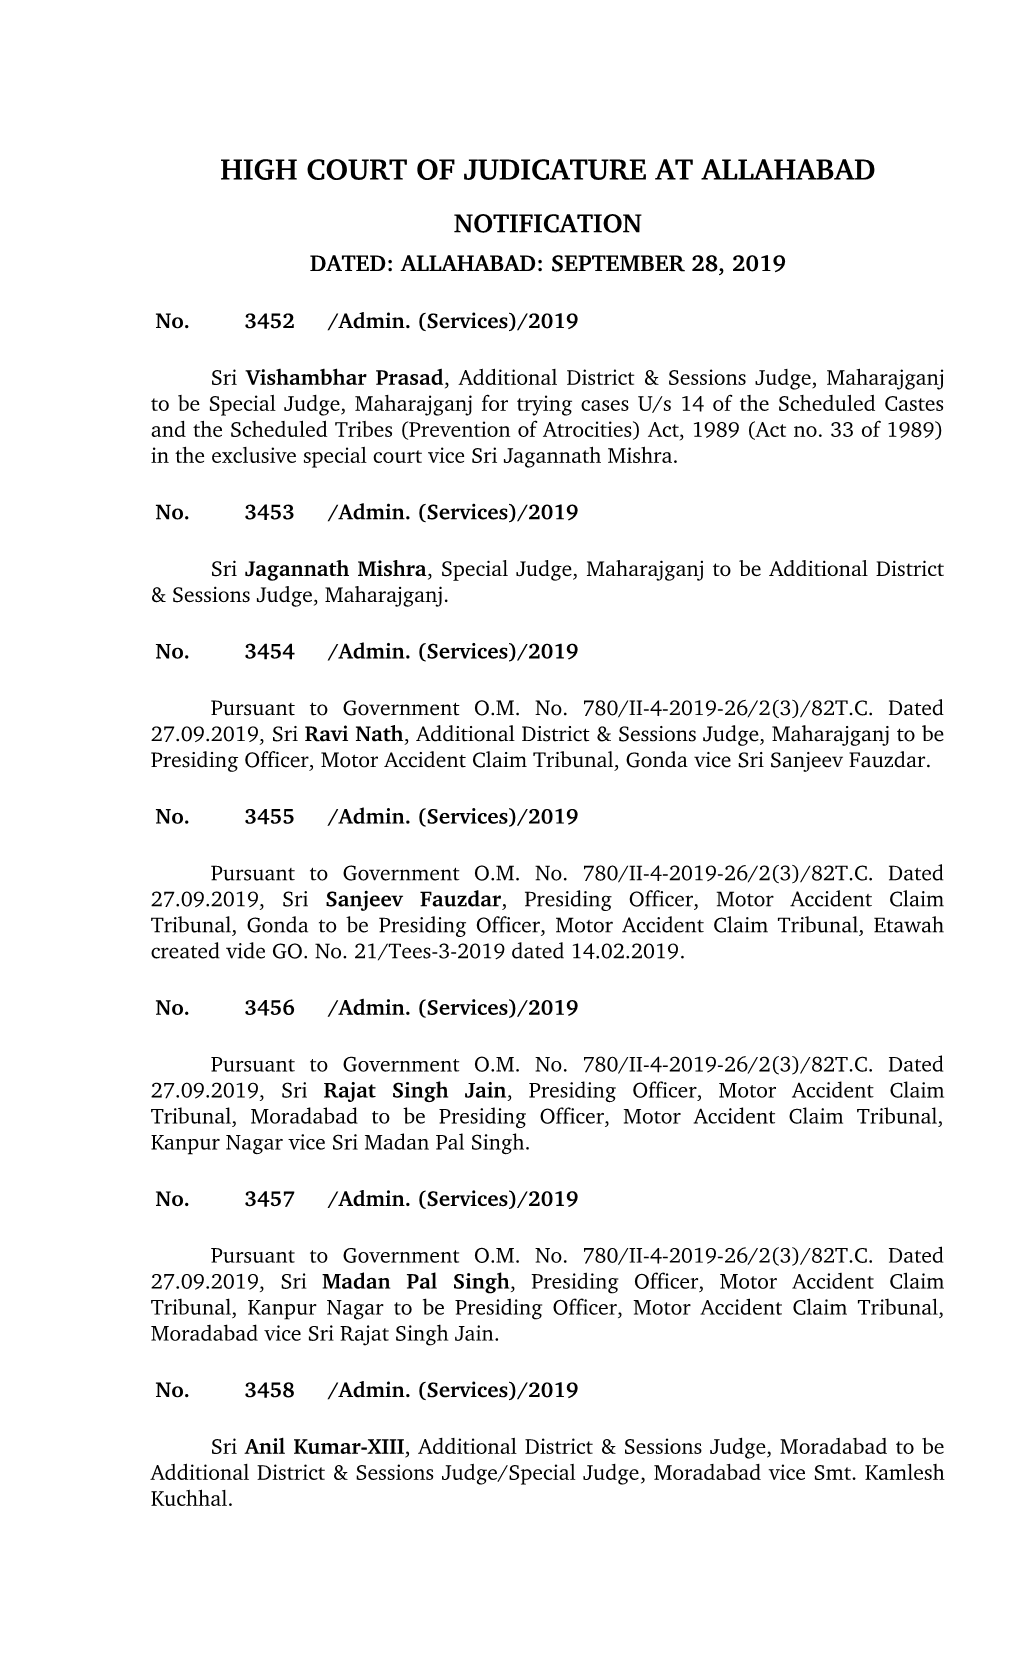 High Court of Judicature at Allahabad Notification Dated: Allahabad: September 28, 2019